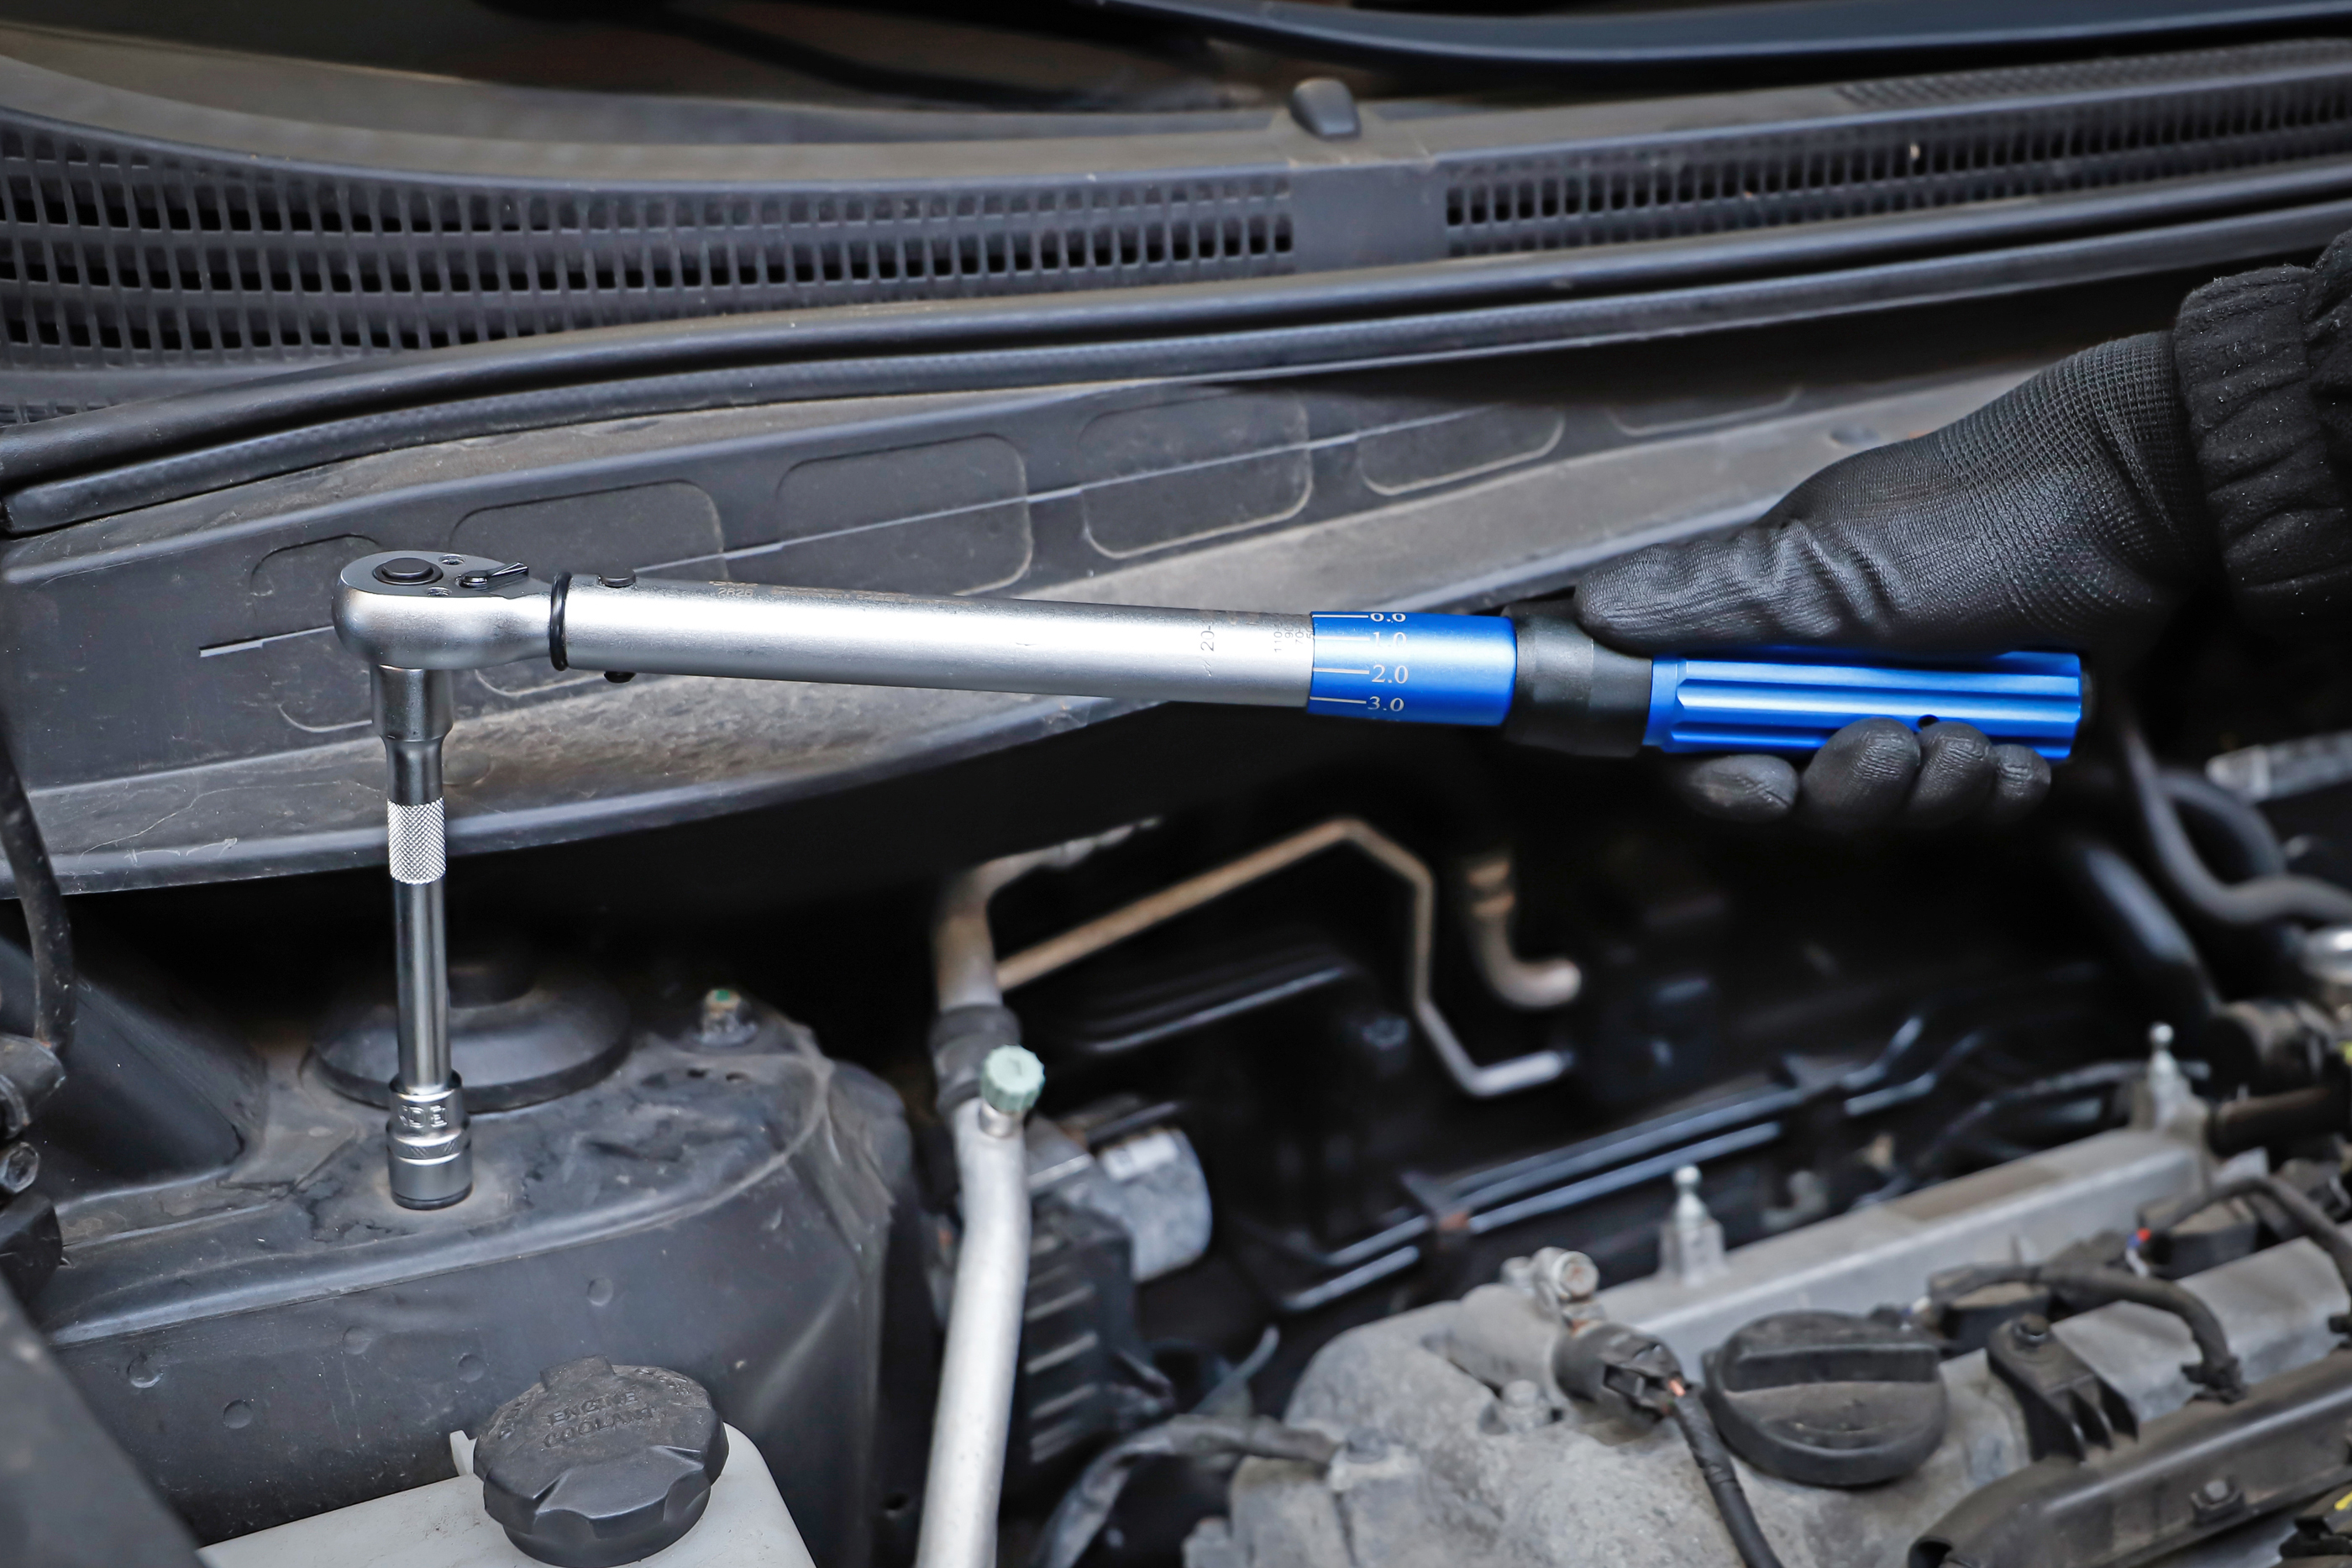 Torque Wrench | 10 mm (3/8